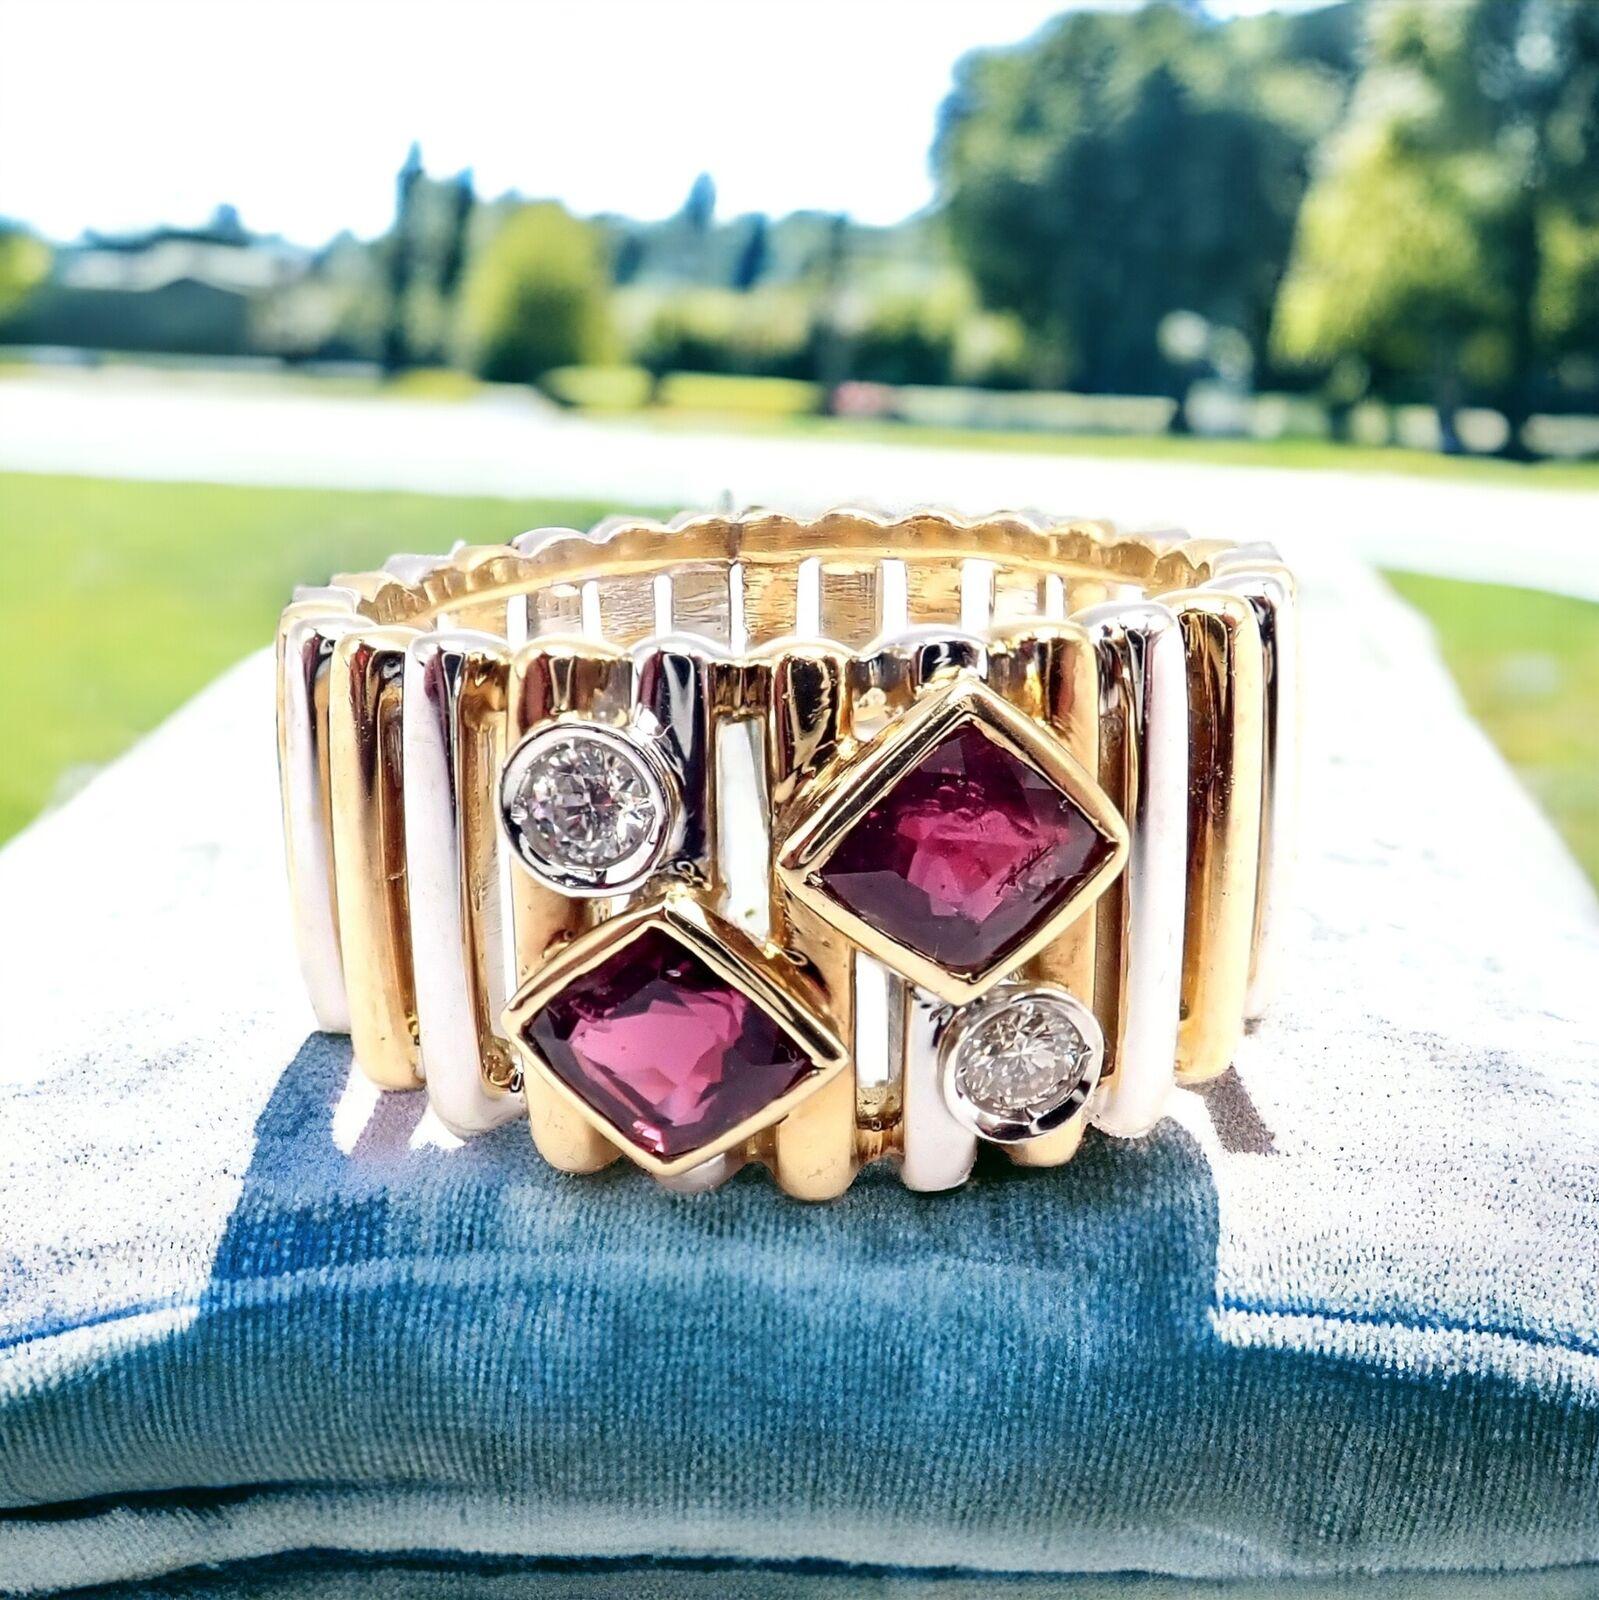 18k Yellow and White Gold Ruby and Diamond Ring by Van Cleef & Arpels. 
With 2 round brilliant cut diamonds, VVS1 Clarity, E Color and 2 princess cut Rubies.

This rare and authentic Van Cleef & Arpels ring combines 18k yellow and white gold,